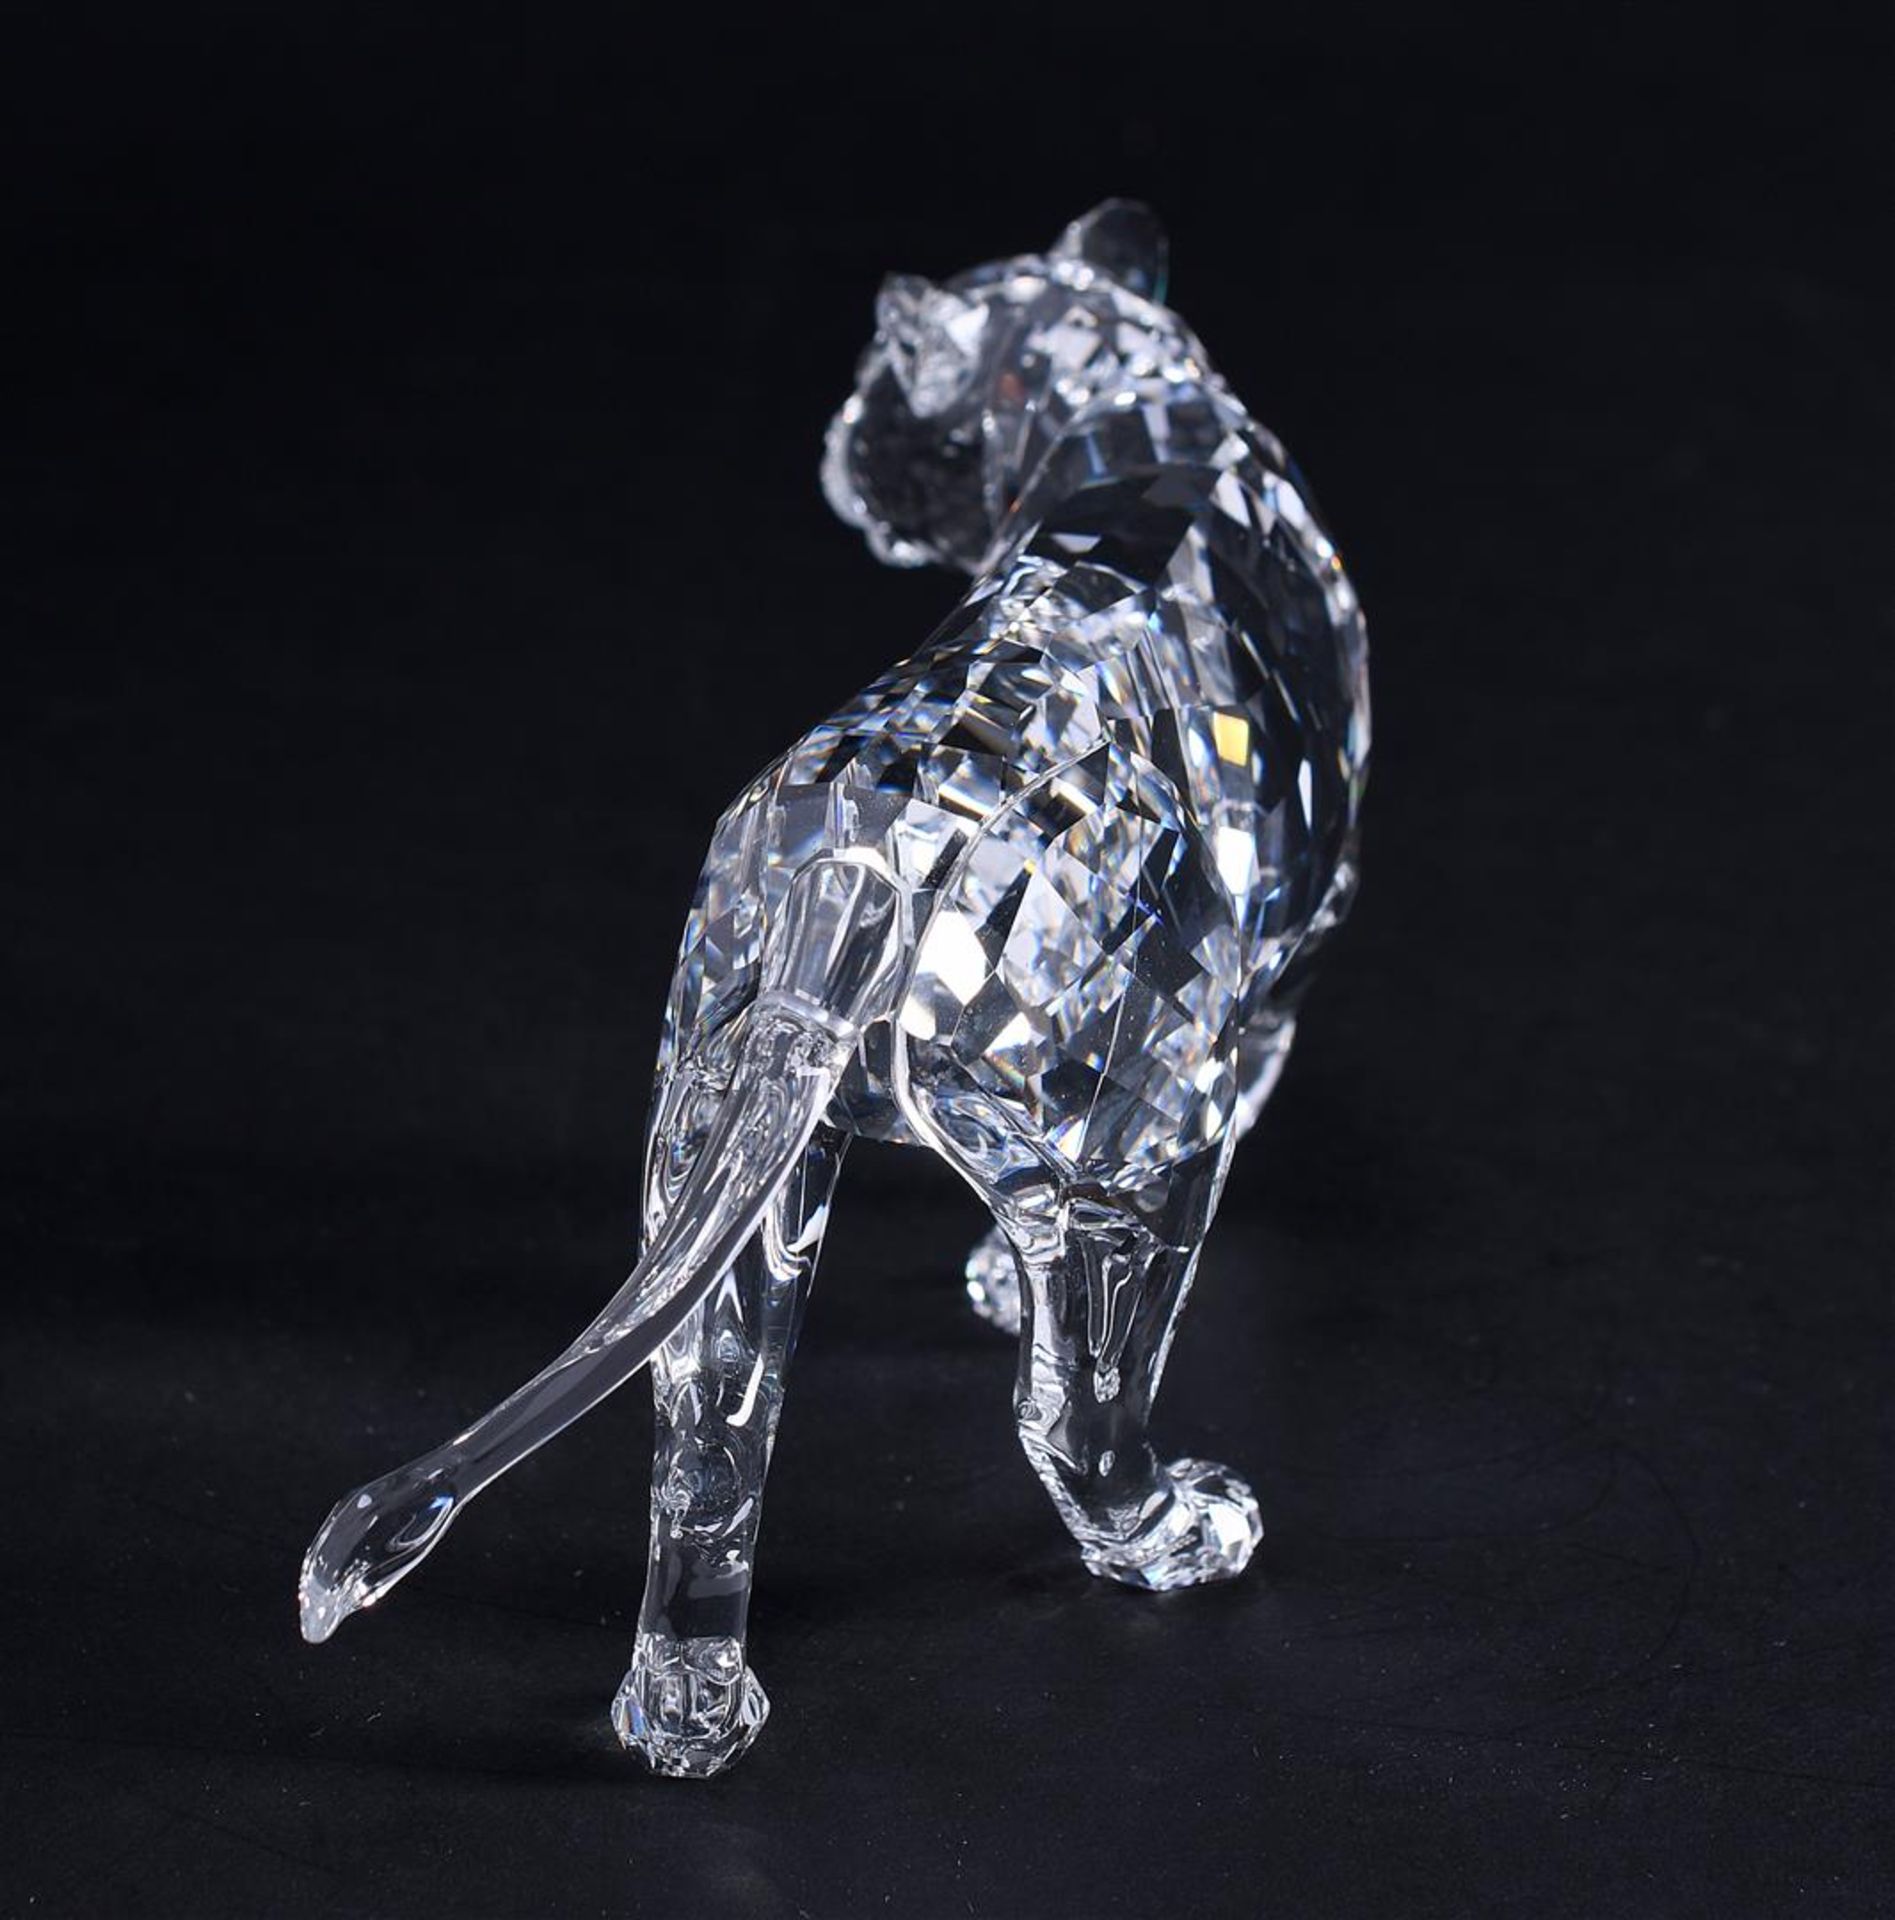 Swarovski, mother lion, year of issue 2013, 1194085. Includes original box.
15,2 x 7,9 cm. - Image 4 of 5